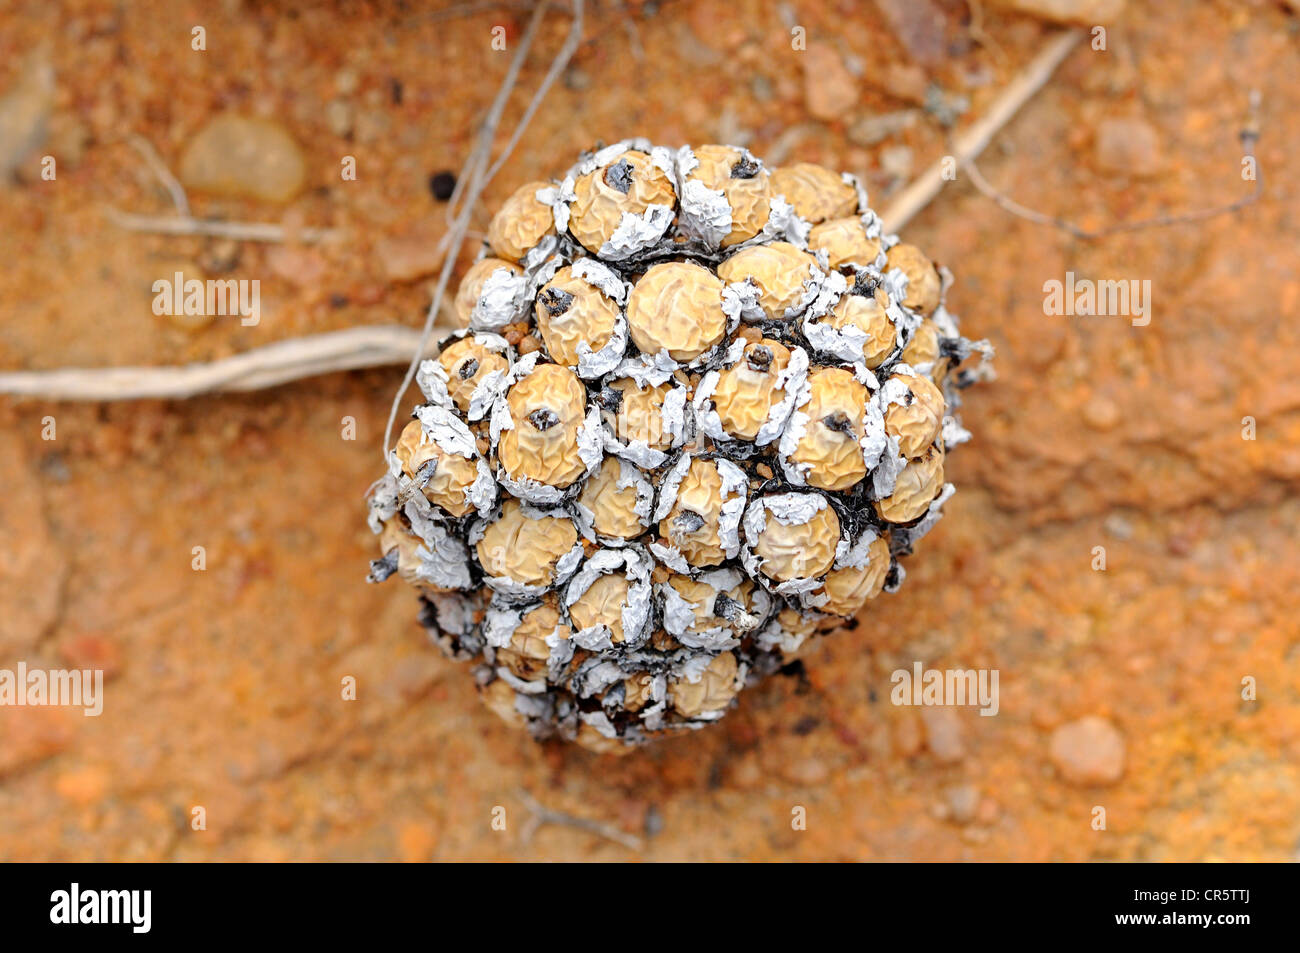 Conophytum sp. in stagione secca, Aizoaceae, Mesembs, Naries, Namaqualand, Sud Africa e Africa Foto Stock